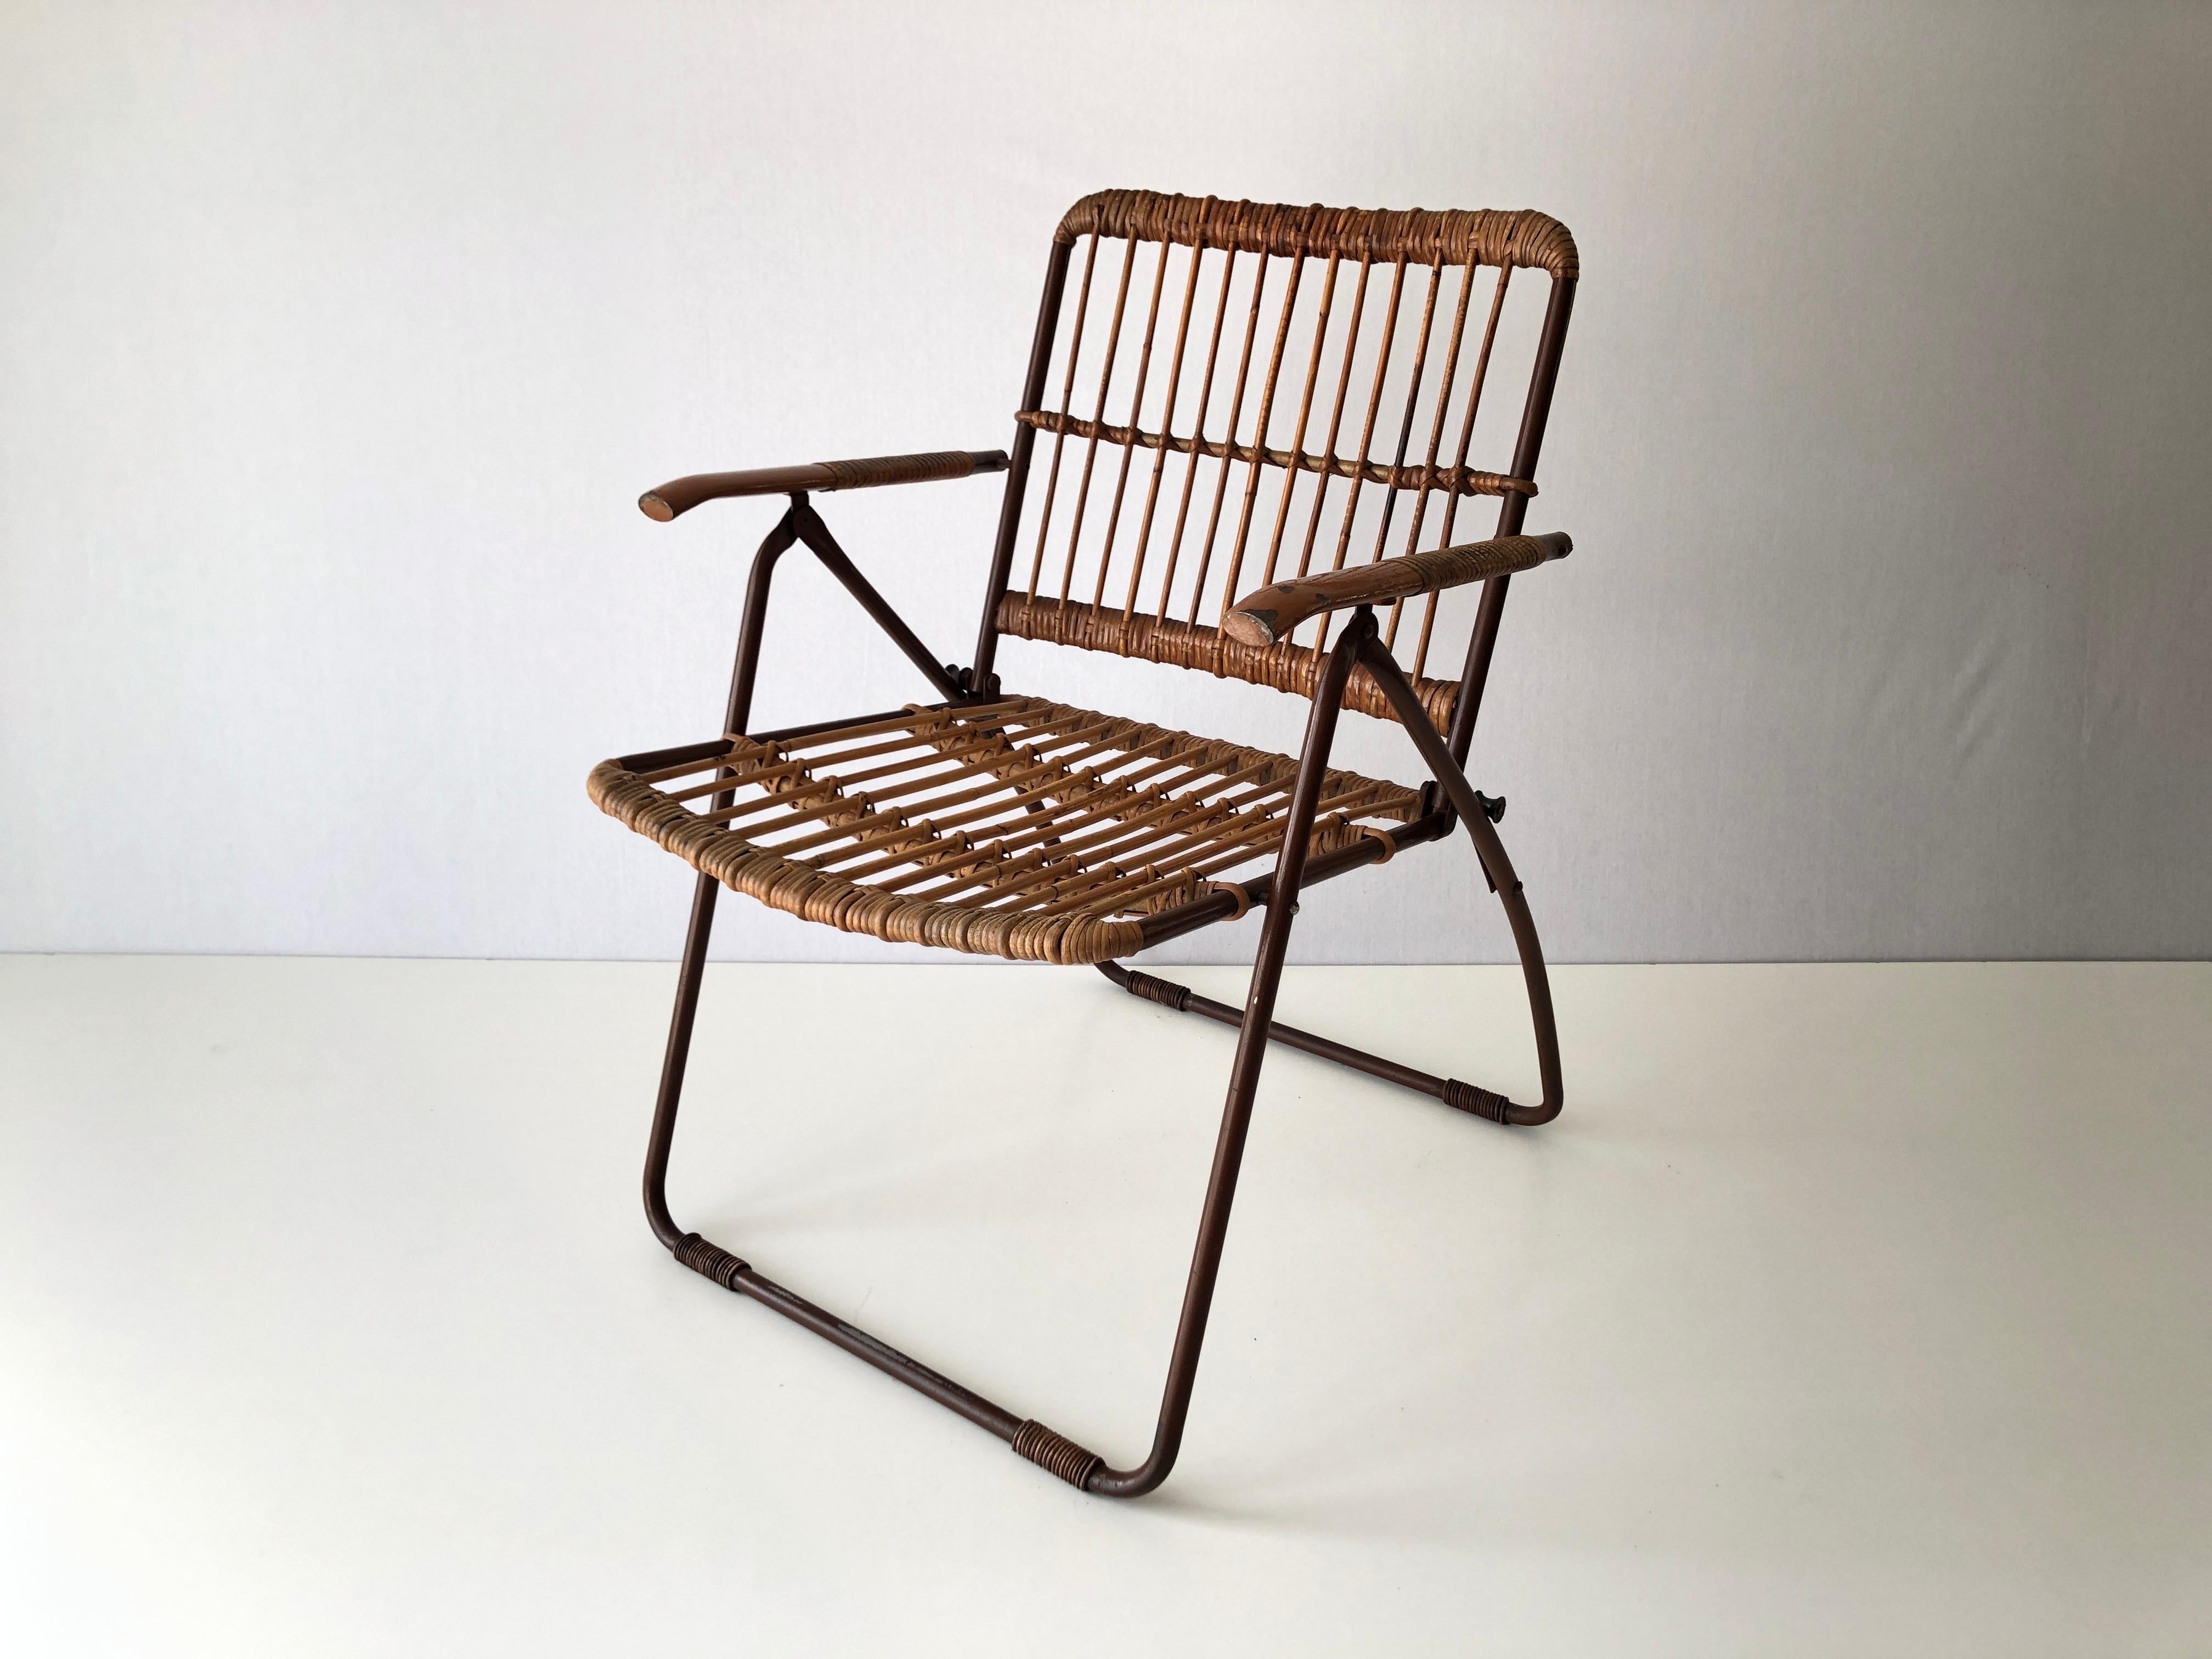 Mid-century Modern Italian Bamboo and Brown Metal Folding Armchair, 1960s, Italy

Measurements :

Height: 81 cm
Width: 54 cm
Depth: 50 cm
Closed: 58 cm x 83 cm x 14 cm

Please do not hesitate to ask us if you have any questions.